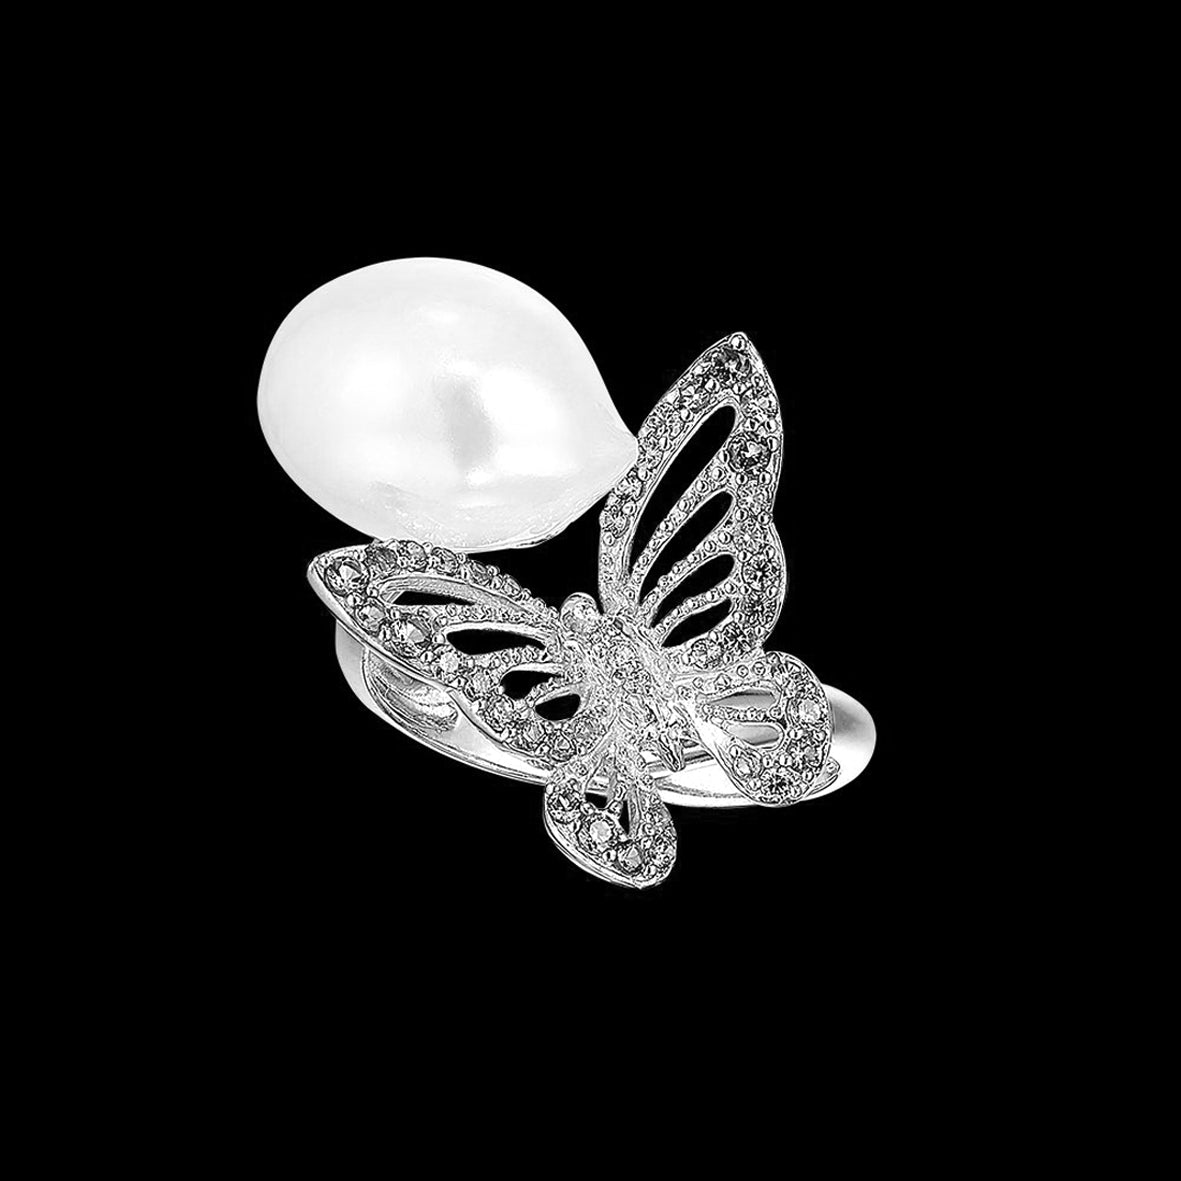 White Butterfly Pearl Ring, Ring, Anabela Chan Joaillerie - Fine jewelry with laboratory grown and created gemstones hand-crafted in the United Kingdom. Anabela Chan Joaillerie is the first fine jewellery brand in the world to champion laboratory-grown and created gemstones with high jewellery design, artisanal craftsmanship and a focus on ethical and sustainable innovations.